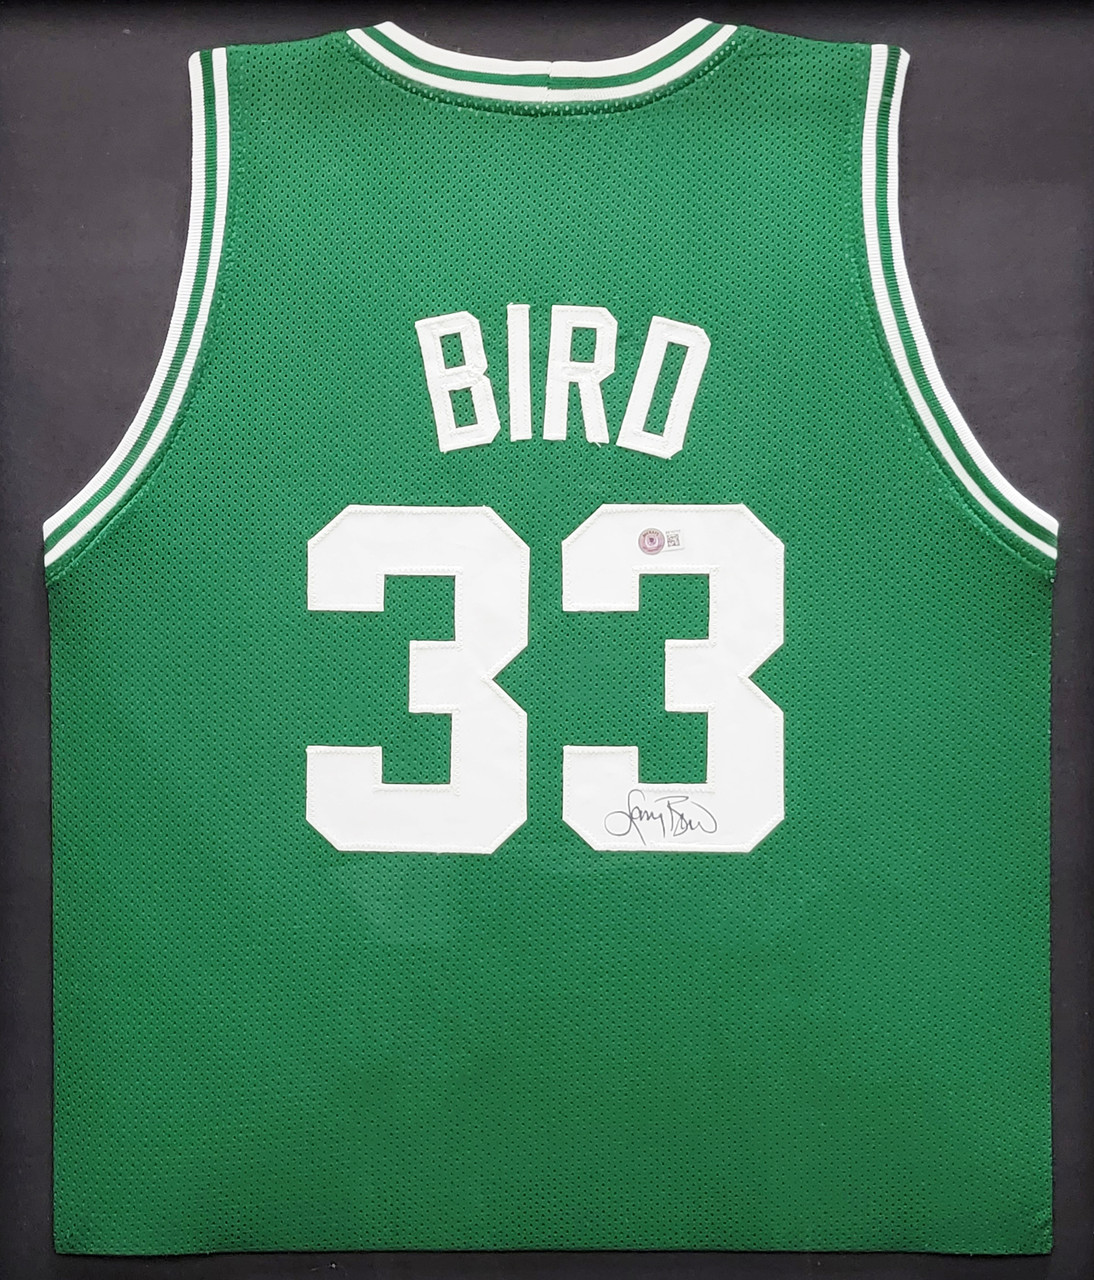 Larry Bird Autographed and Framed Green Boston Celtics Jersey - Beautifully  Matted and Framed - Hand Signed By Bird and Certified Authentic by Beckett